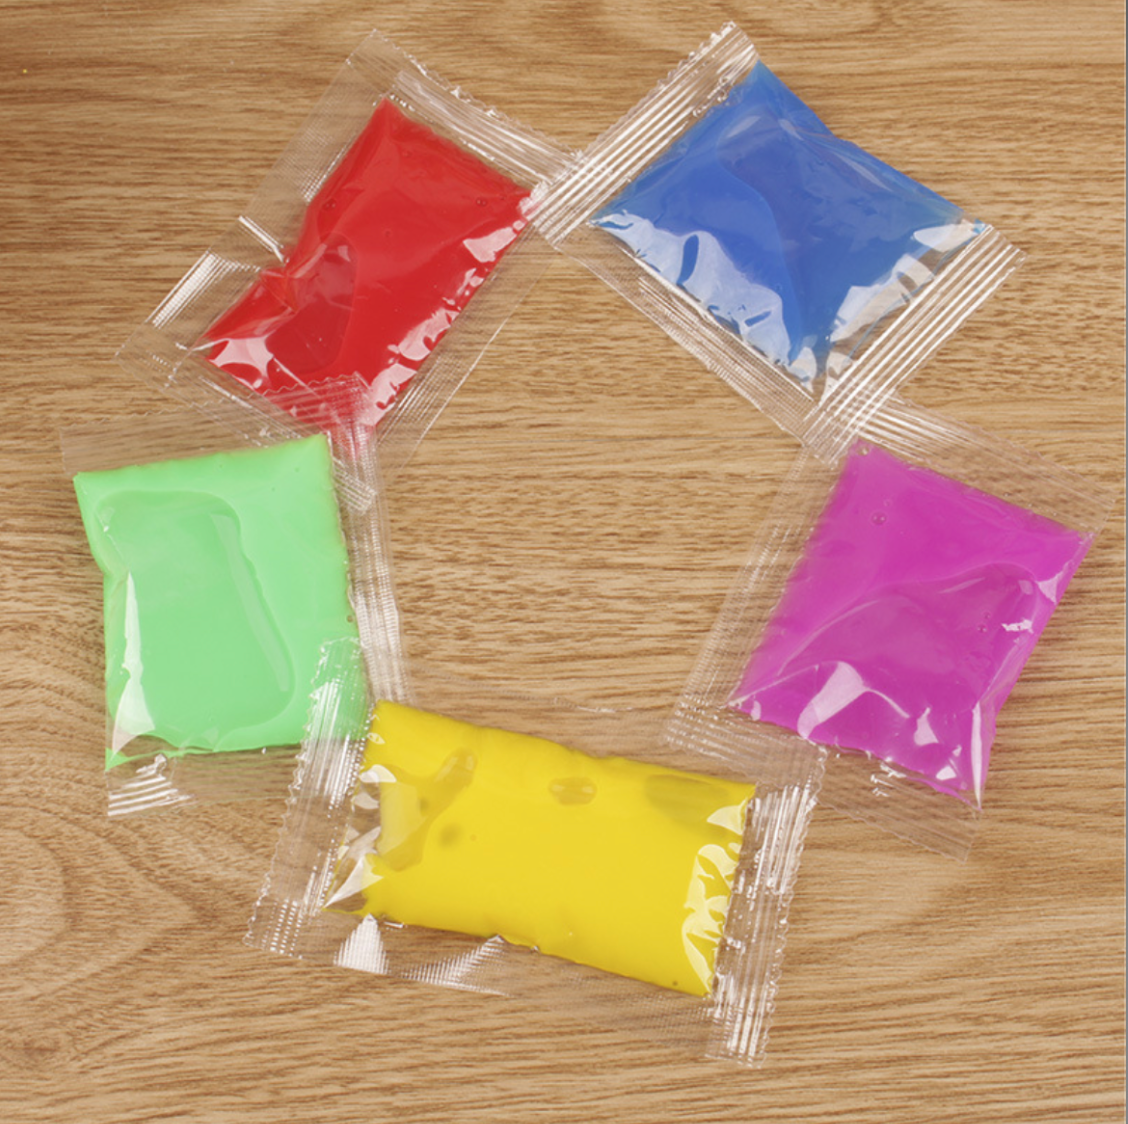 5 Colored Non-Stick Slime Pack - Limited Time Offer